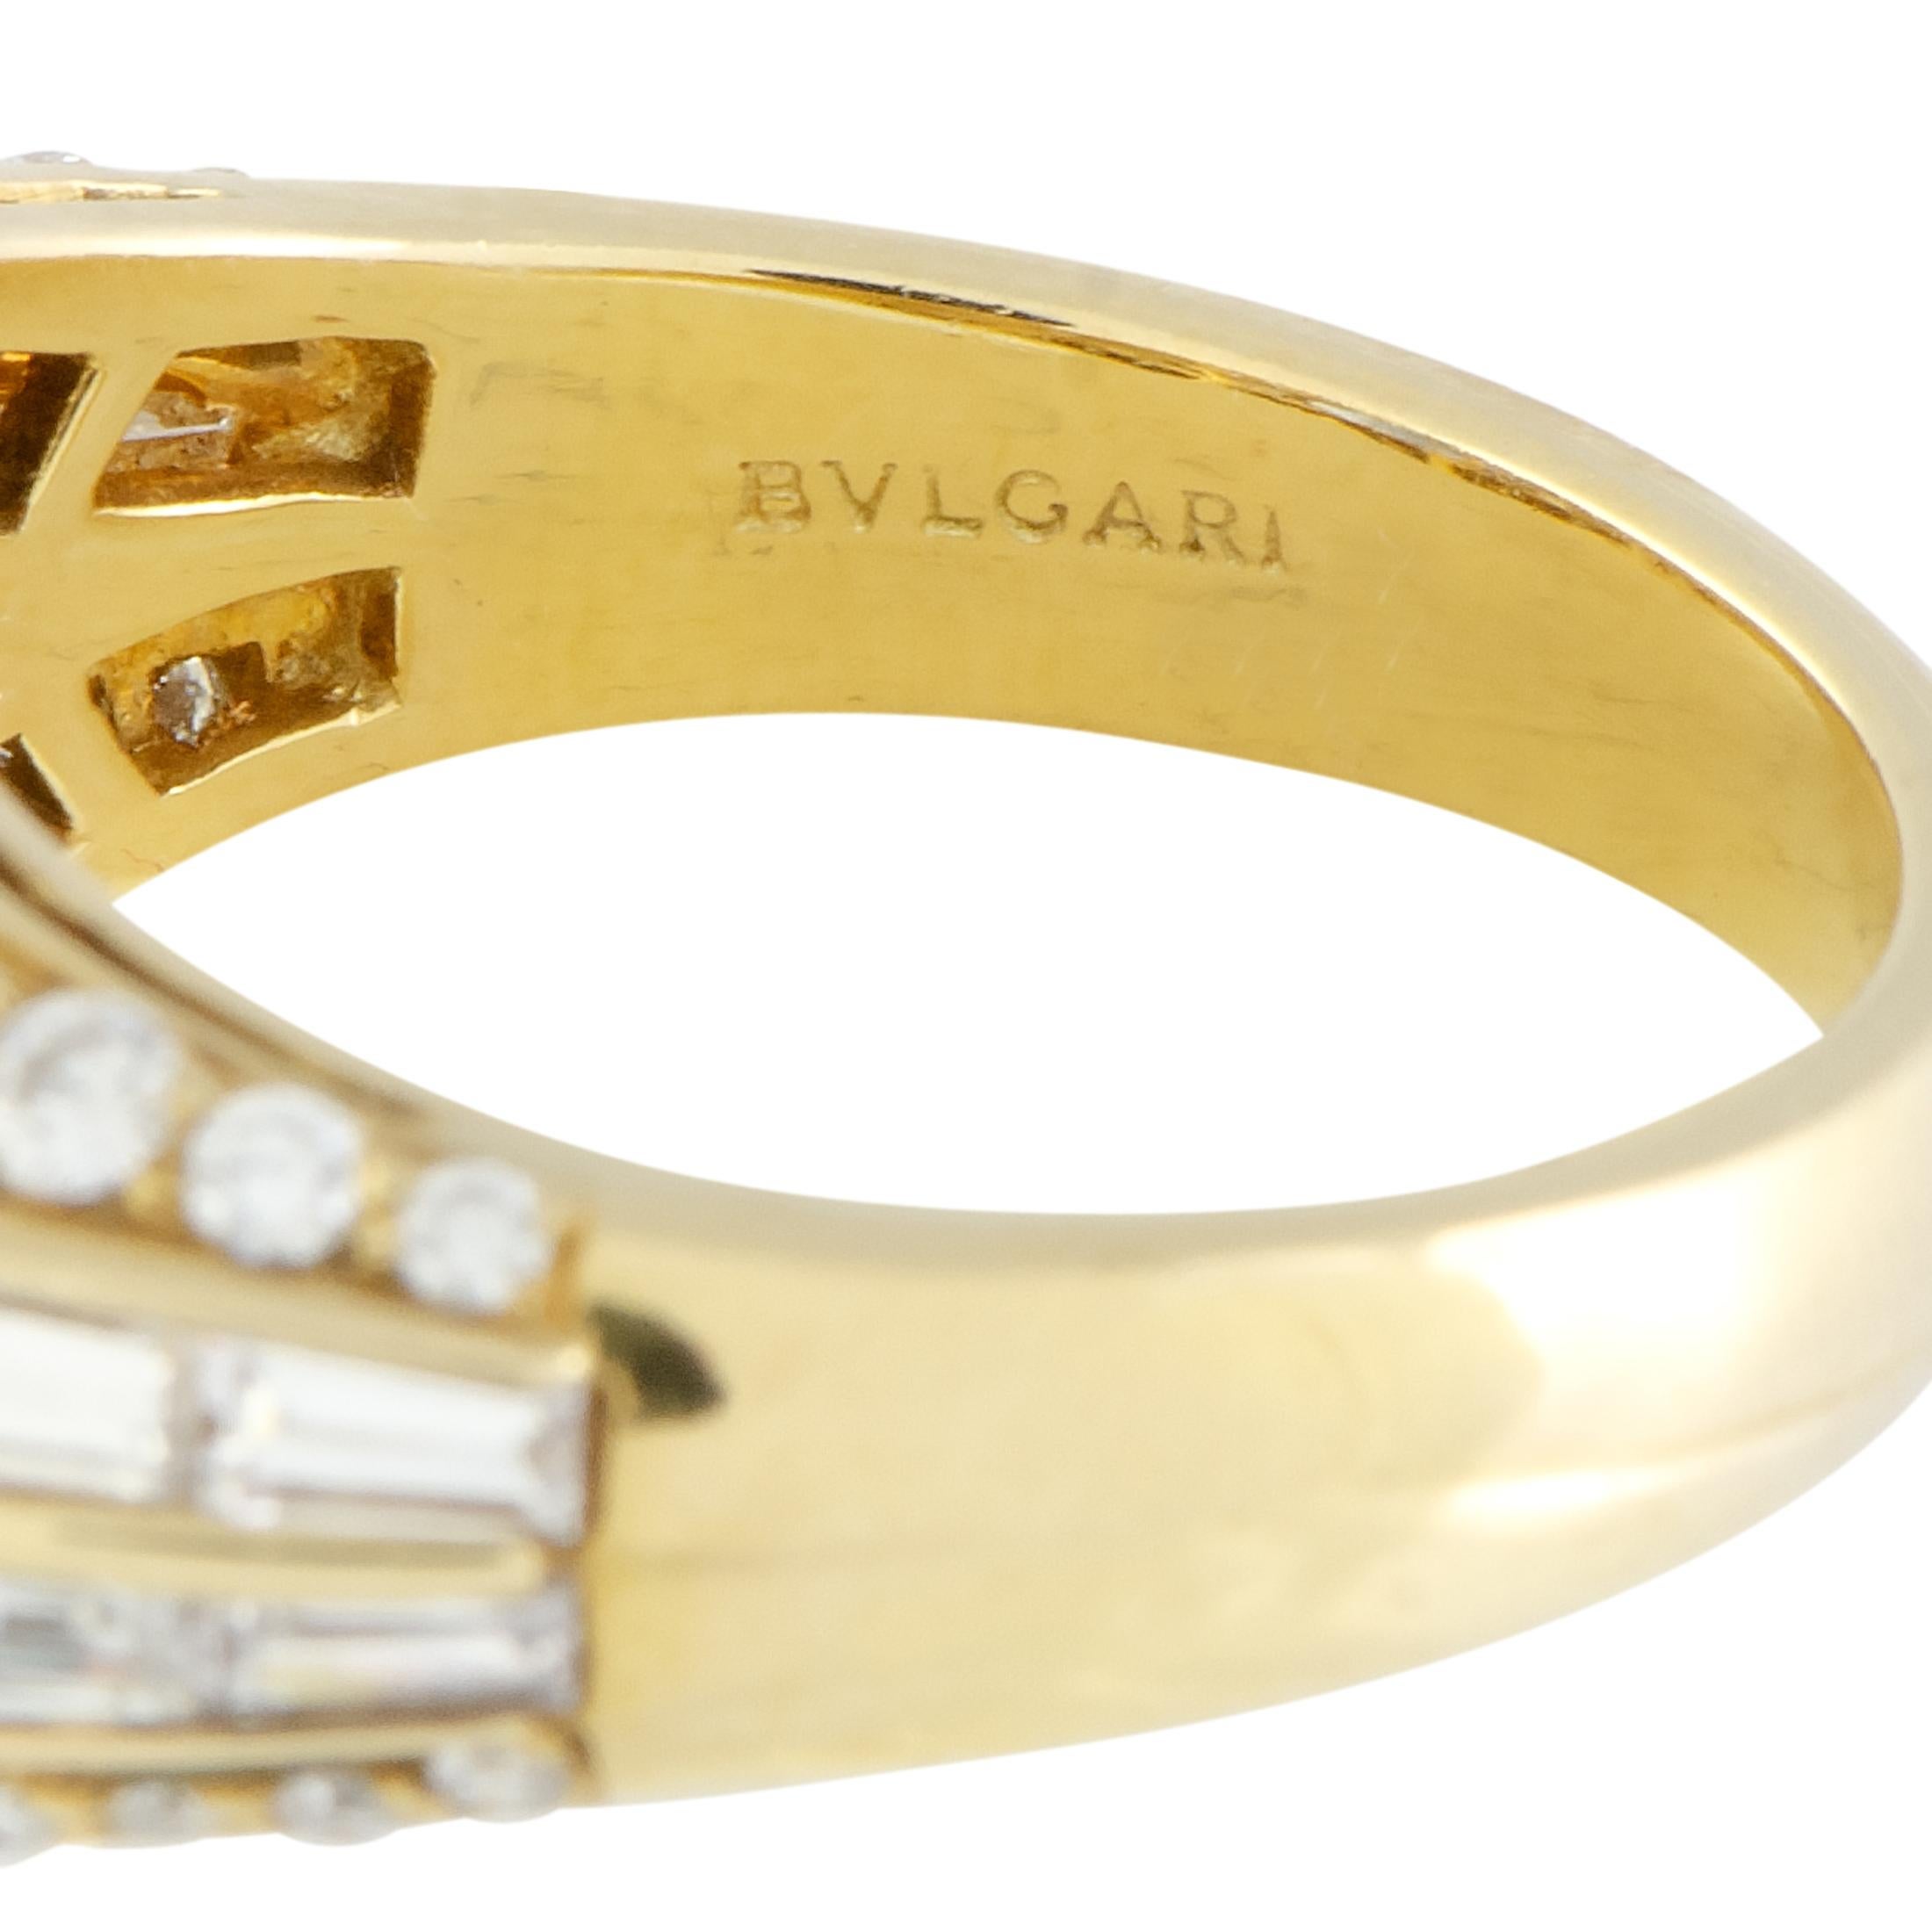 The fascinating sapphire takes the central place in this Bvlgari ring in an exceptionally imposing fashion, luxuriously complemented by the lustrous glisten of diamonds and the alluring radiance of 18K yellow gold. The sapphire weighs 2.89 carats,